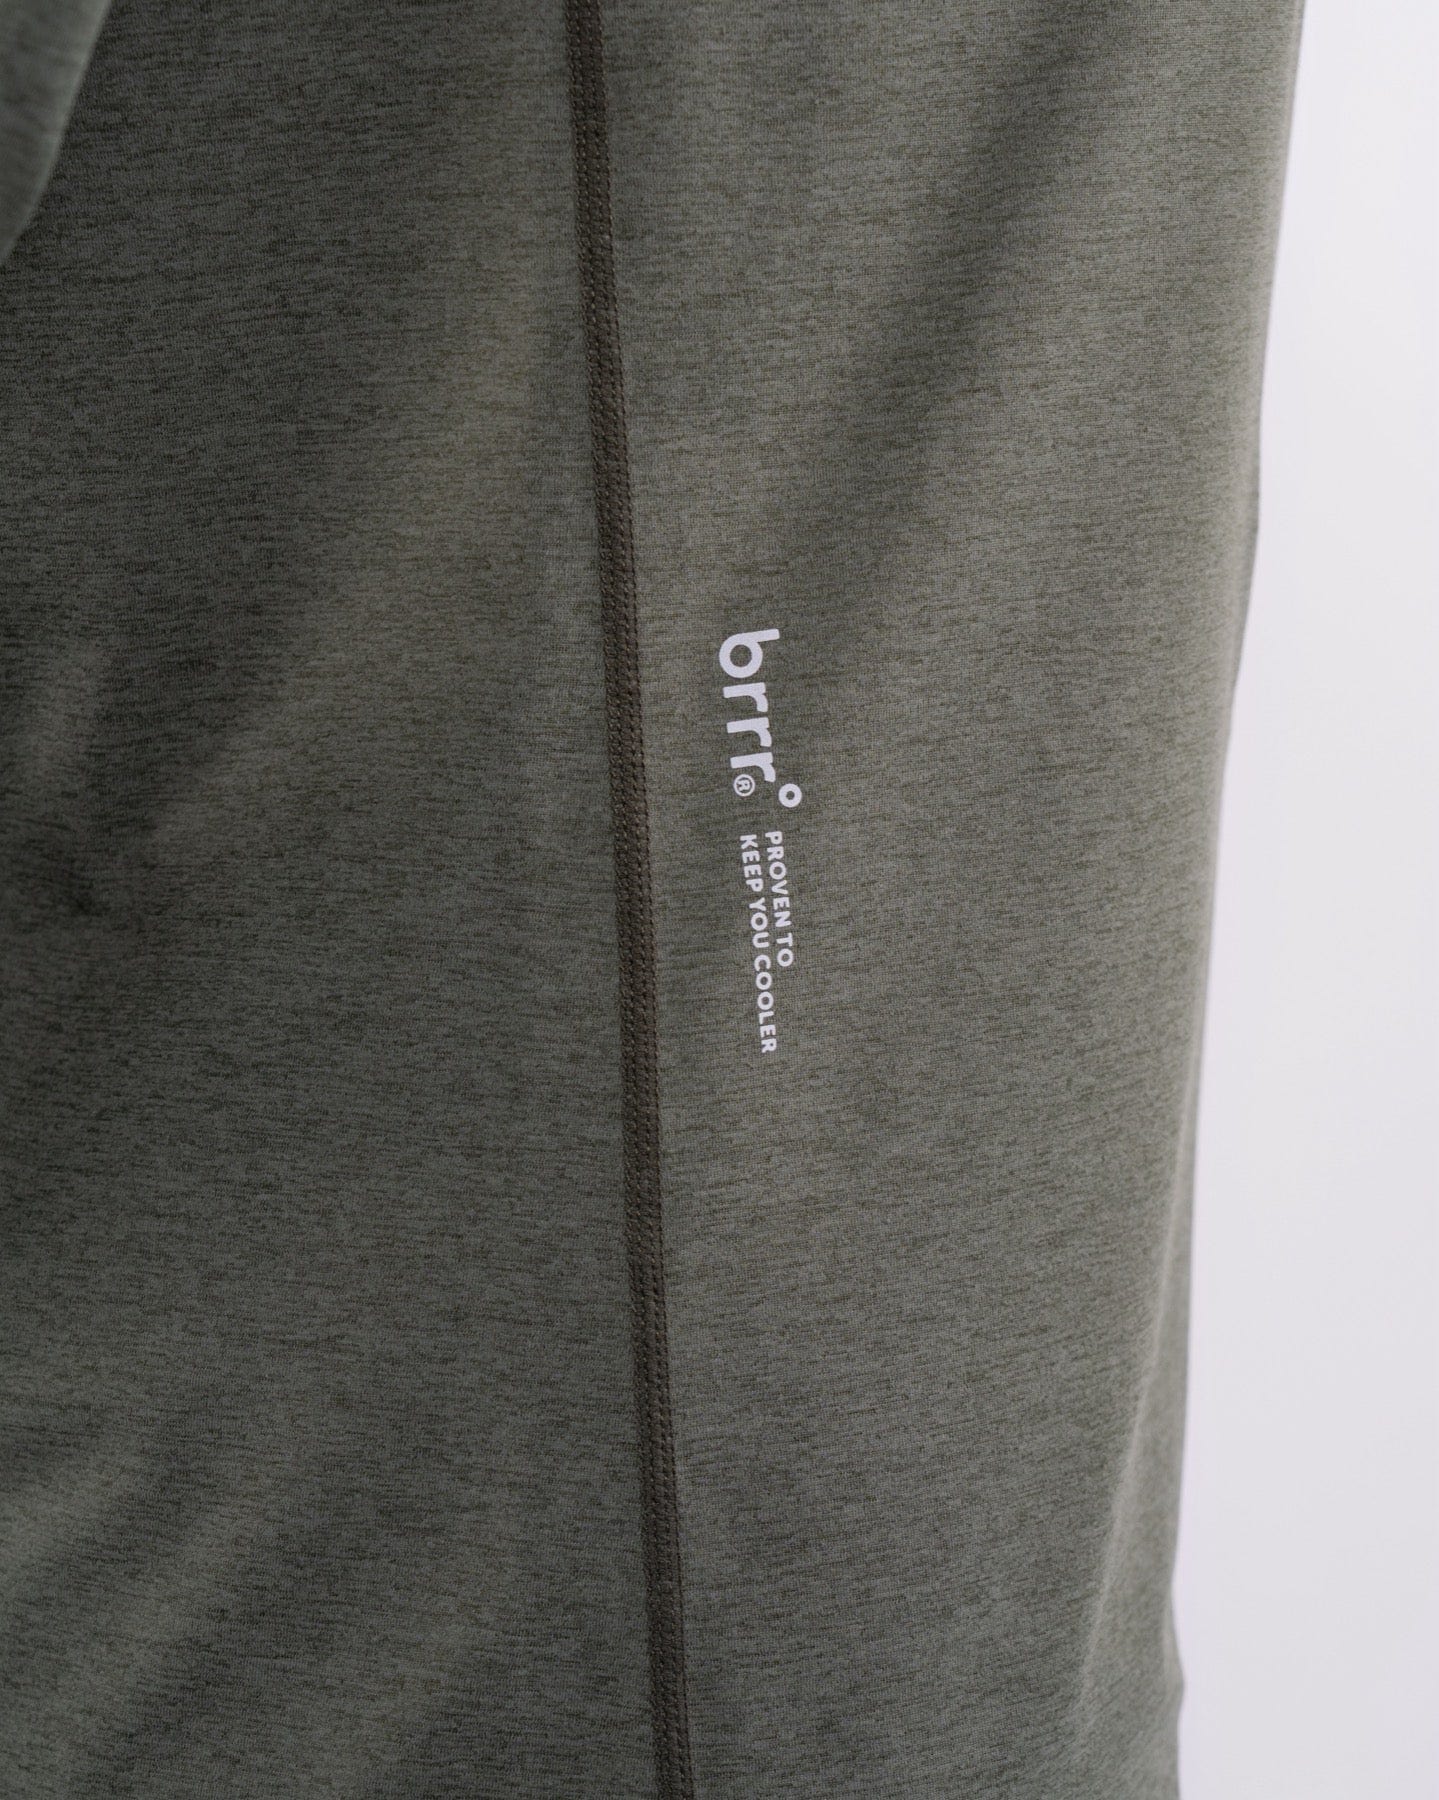 A close-up view of a gray, moisture-resistant garment with a zipper and a subtle logo, emphasizing minimalist design and details.